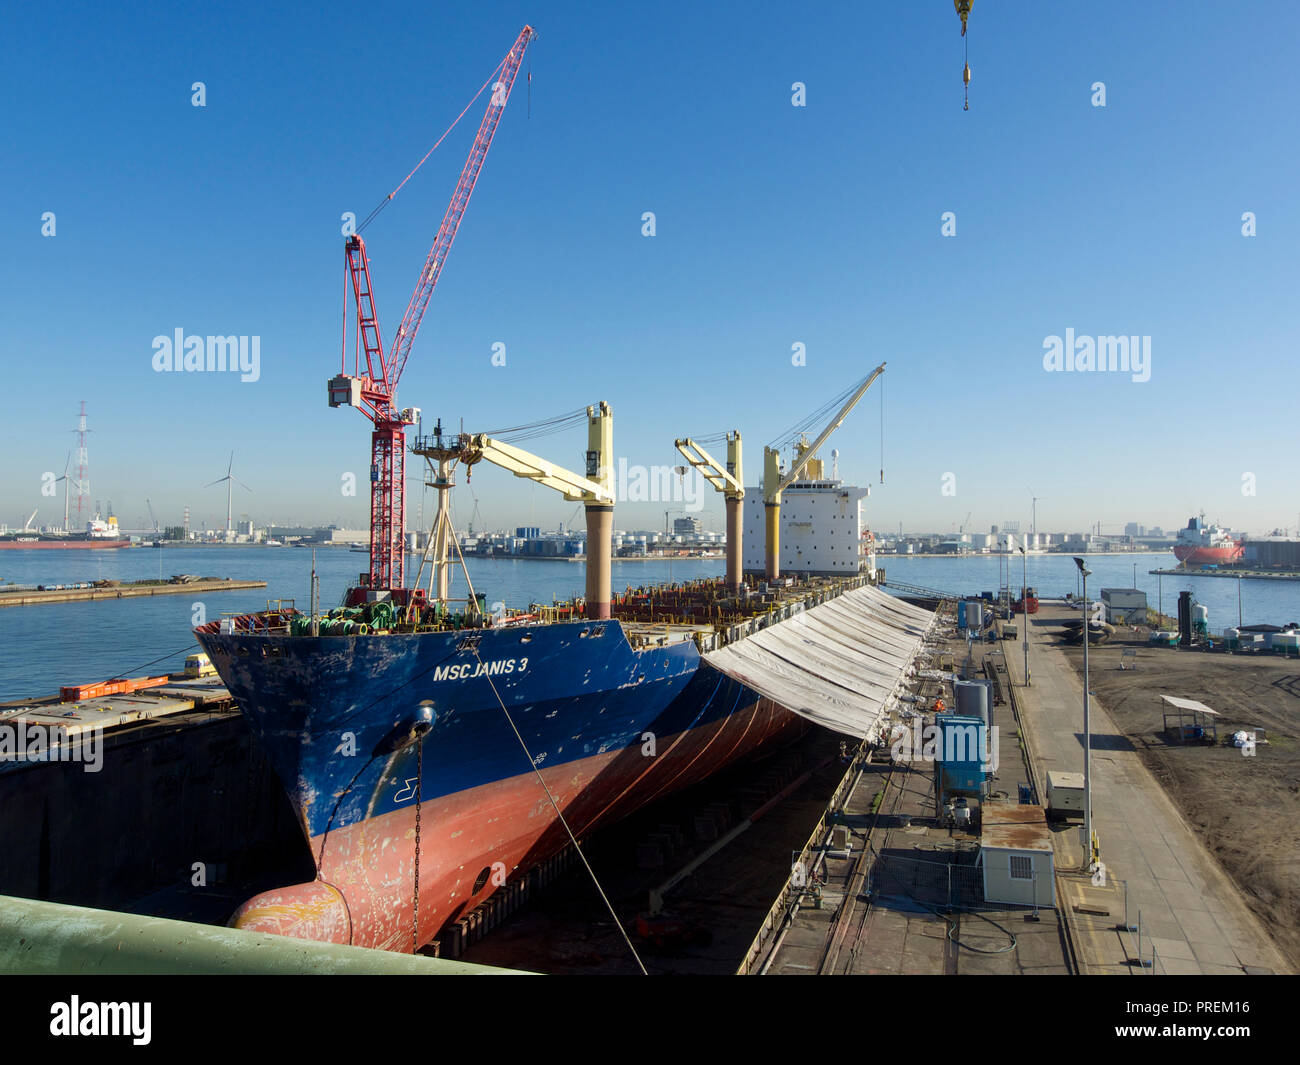 Cargo ship in dry dock for maintenance in the port of Antwerp, Belgium with more of the port visible Stock Photo